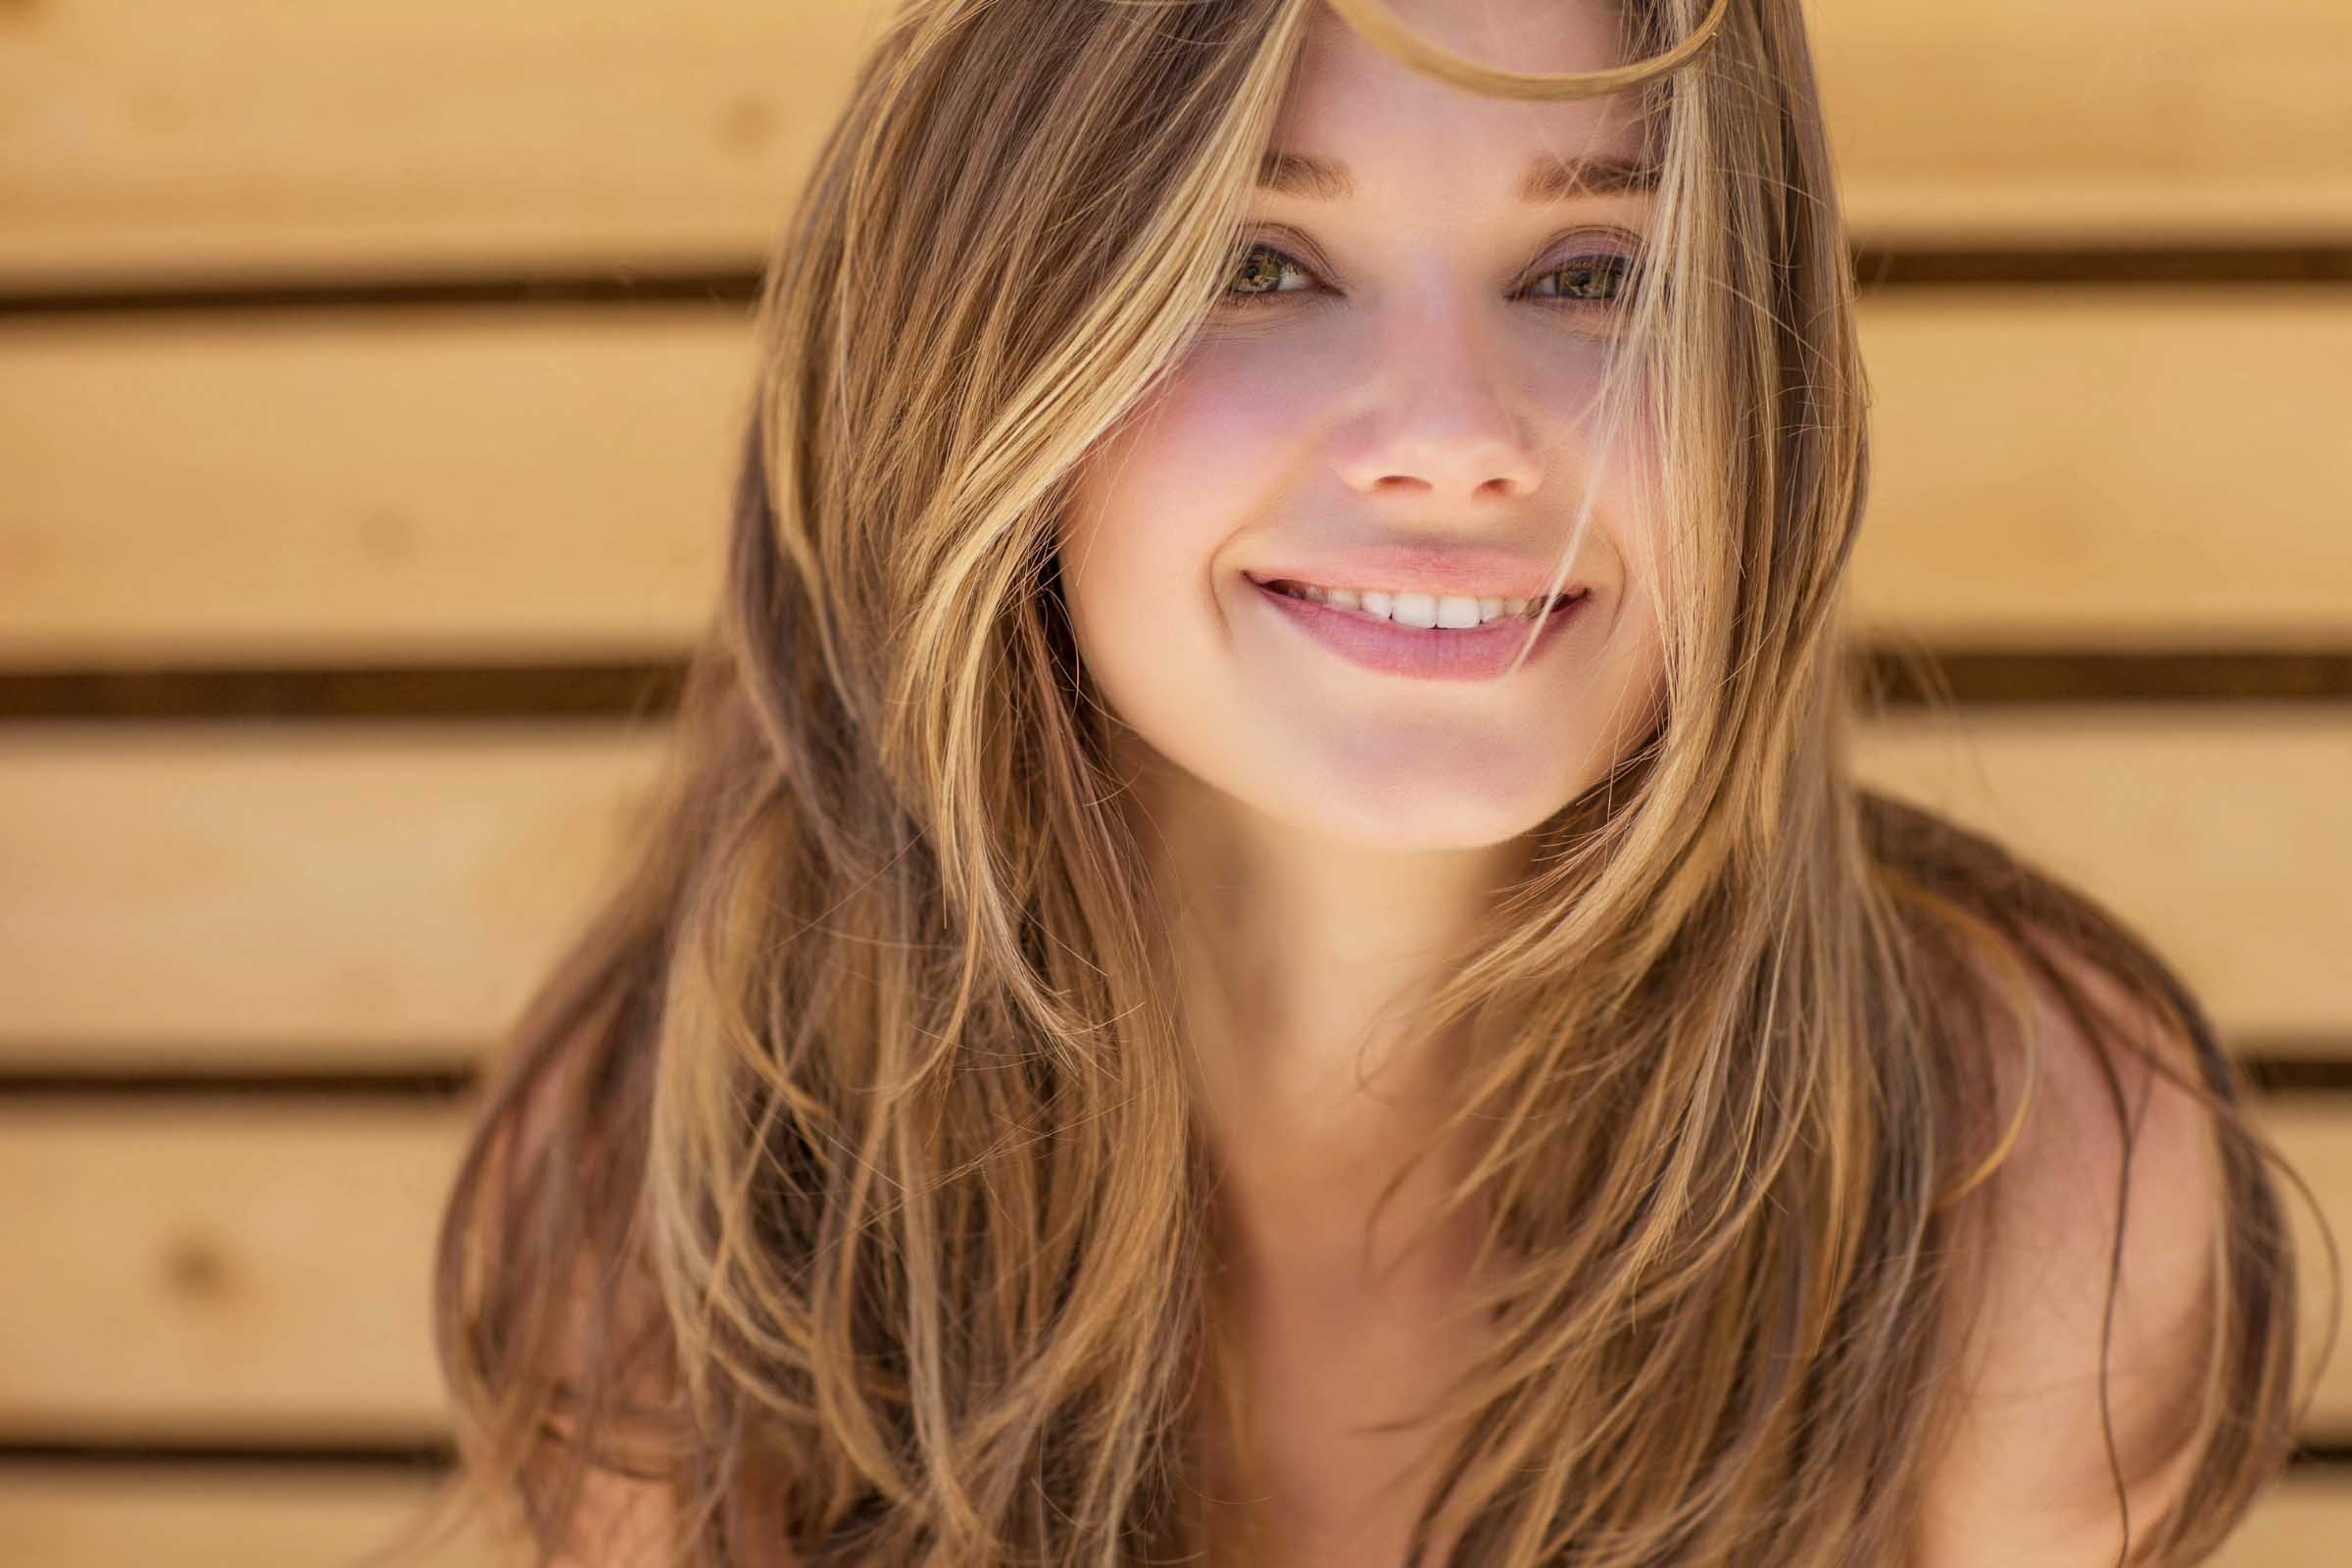 Tips for Choosing the Right Shade of Blonde Highlights